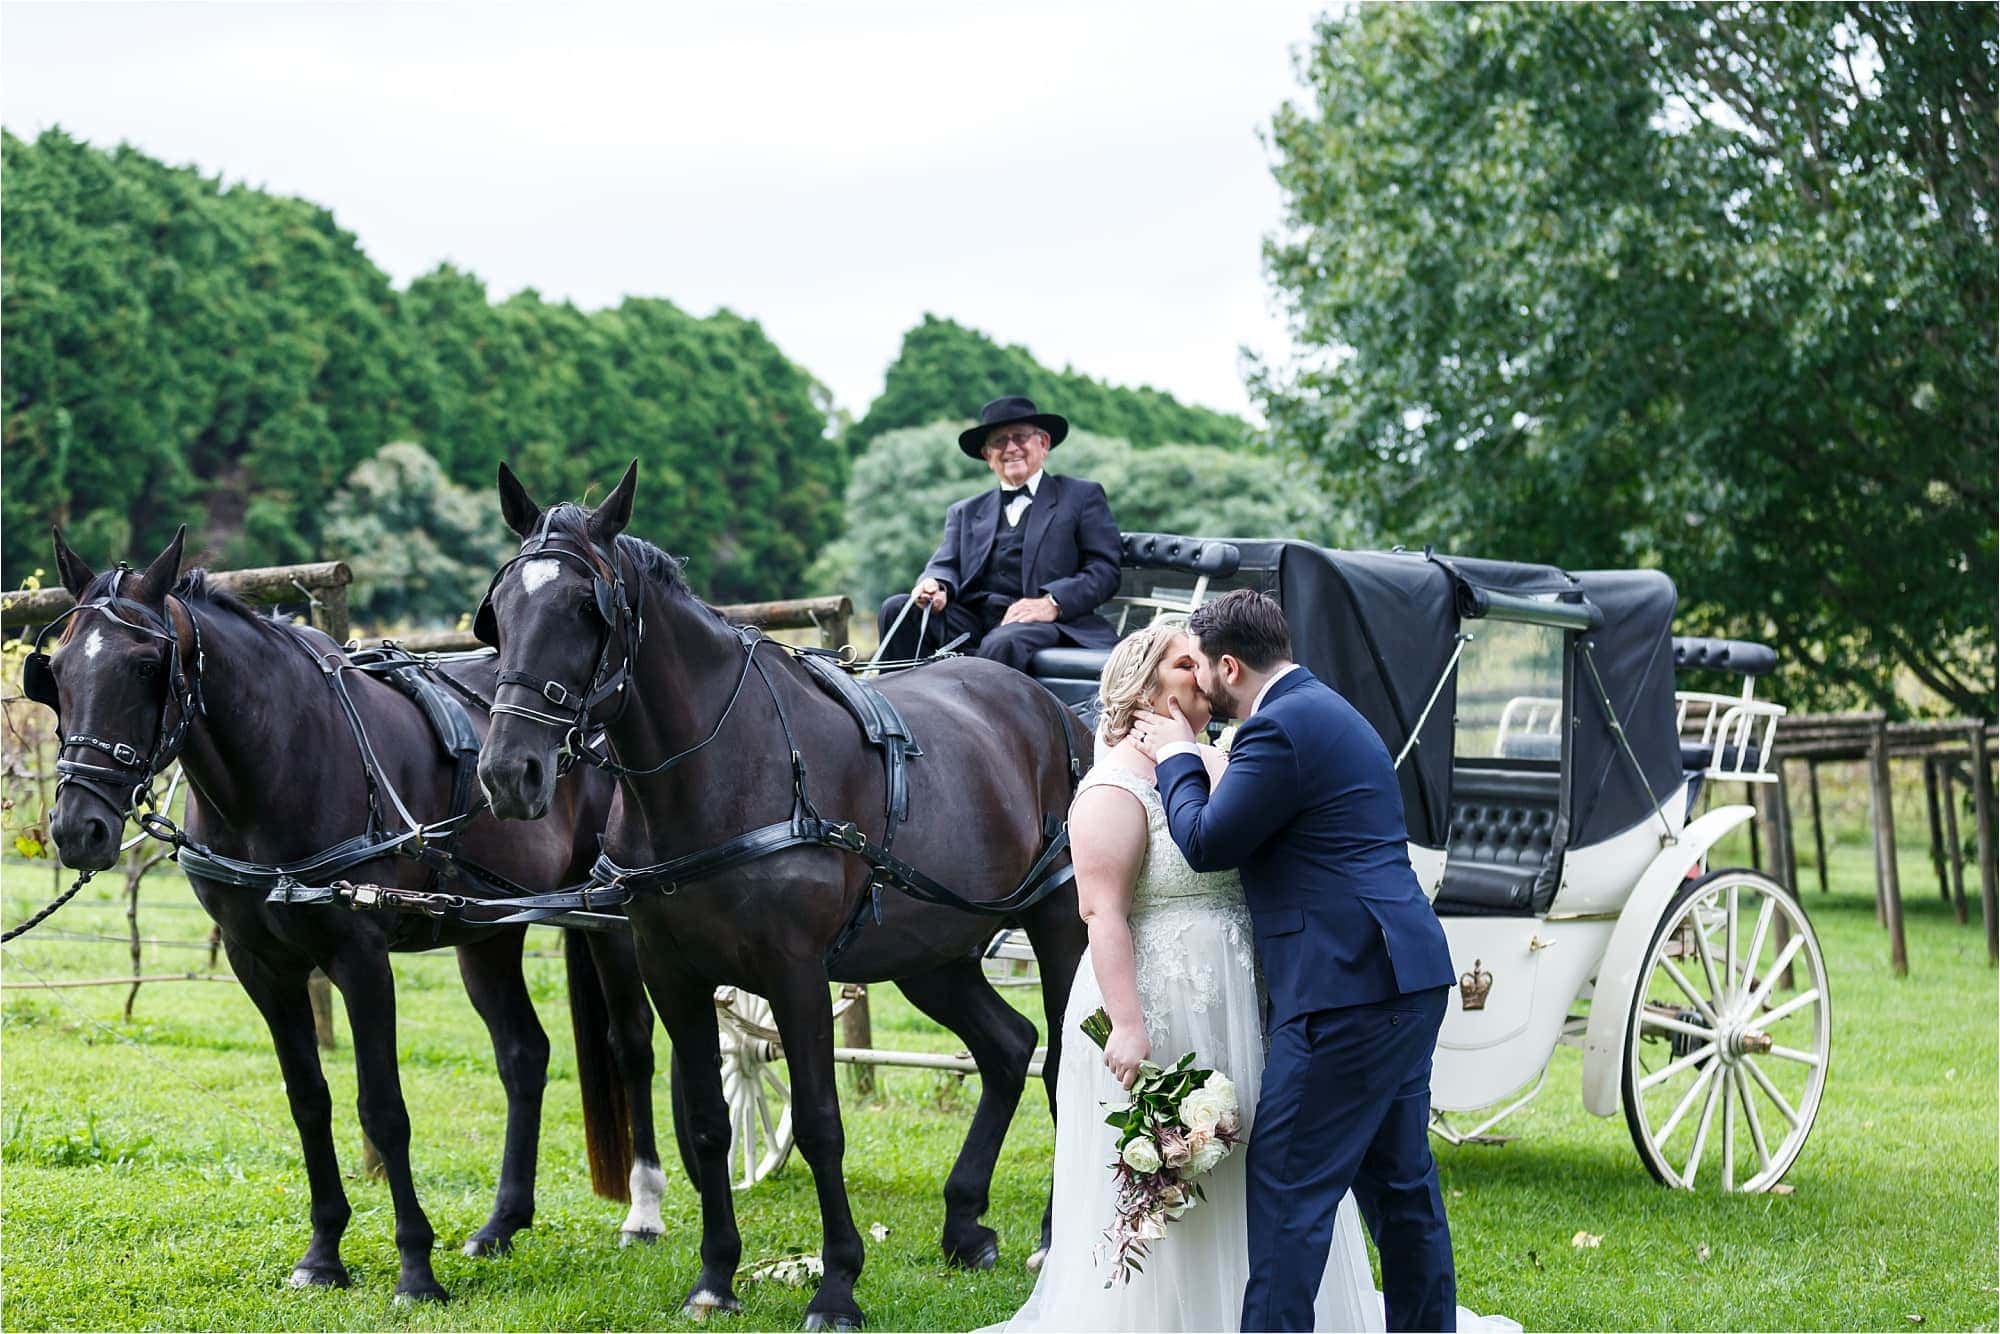 Cedar Creek Estate Winery Wedding Photography with horse and carriage wedding transport.